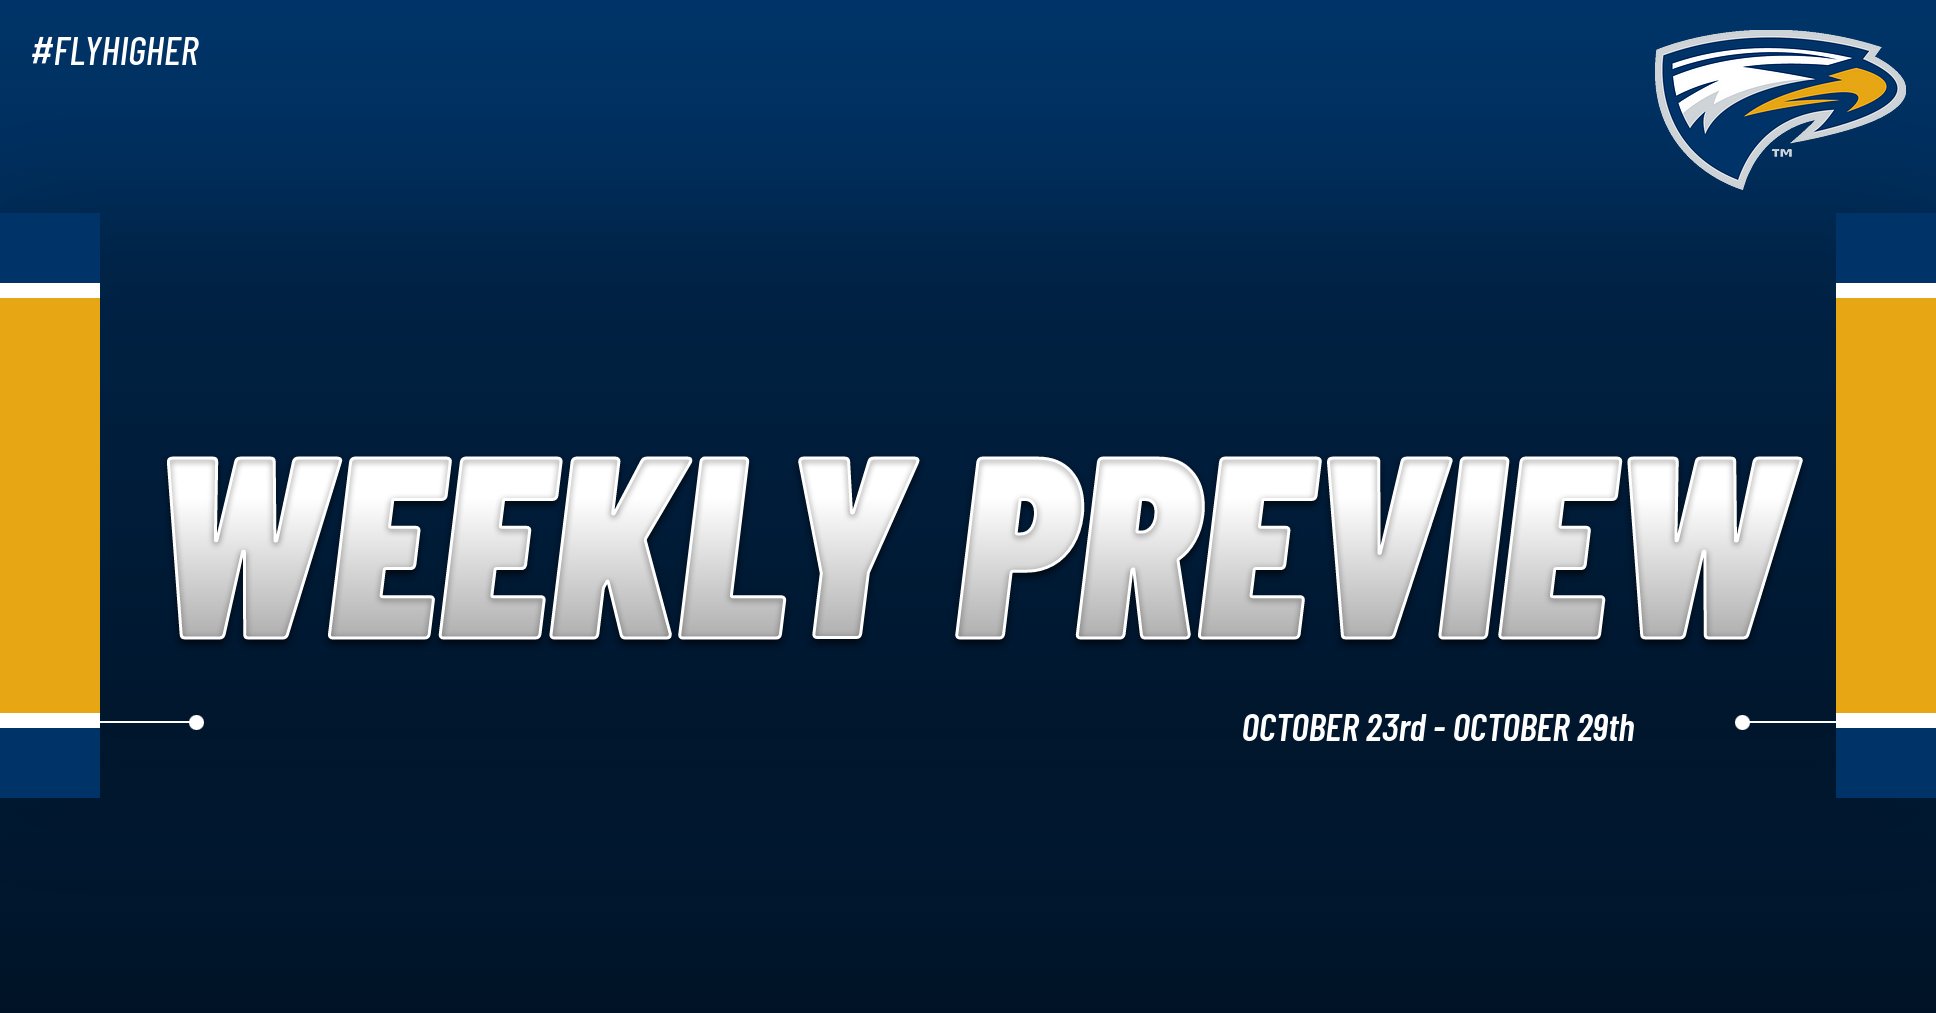 Emory Athletics Weekly Preview: October 23rd - October 29th